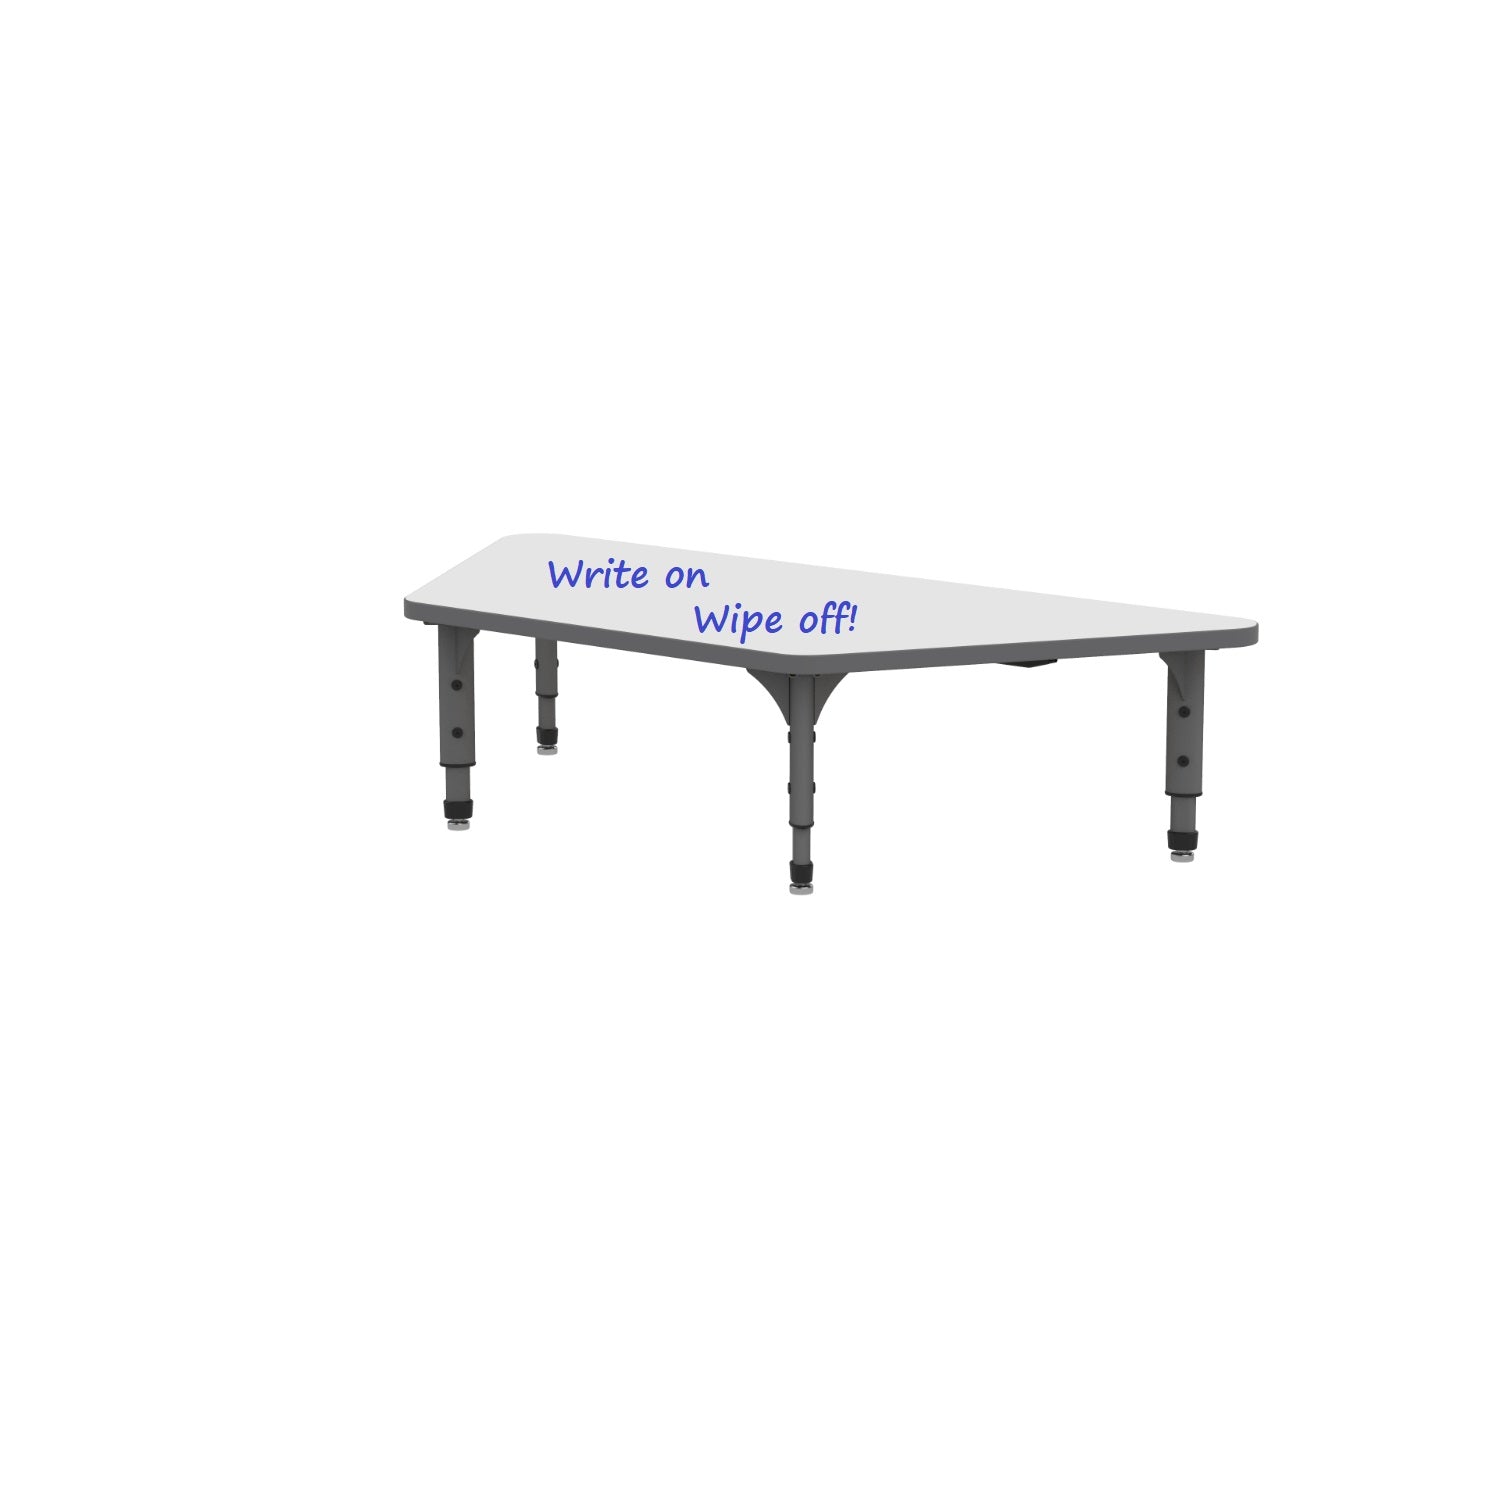 Adjustable Height Floor Activity Table with White Dry-Erase Markerboard Top, 30" x 60" Trapezoid